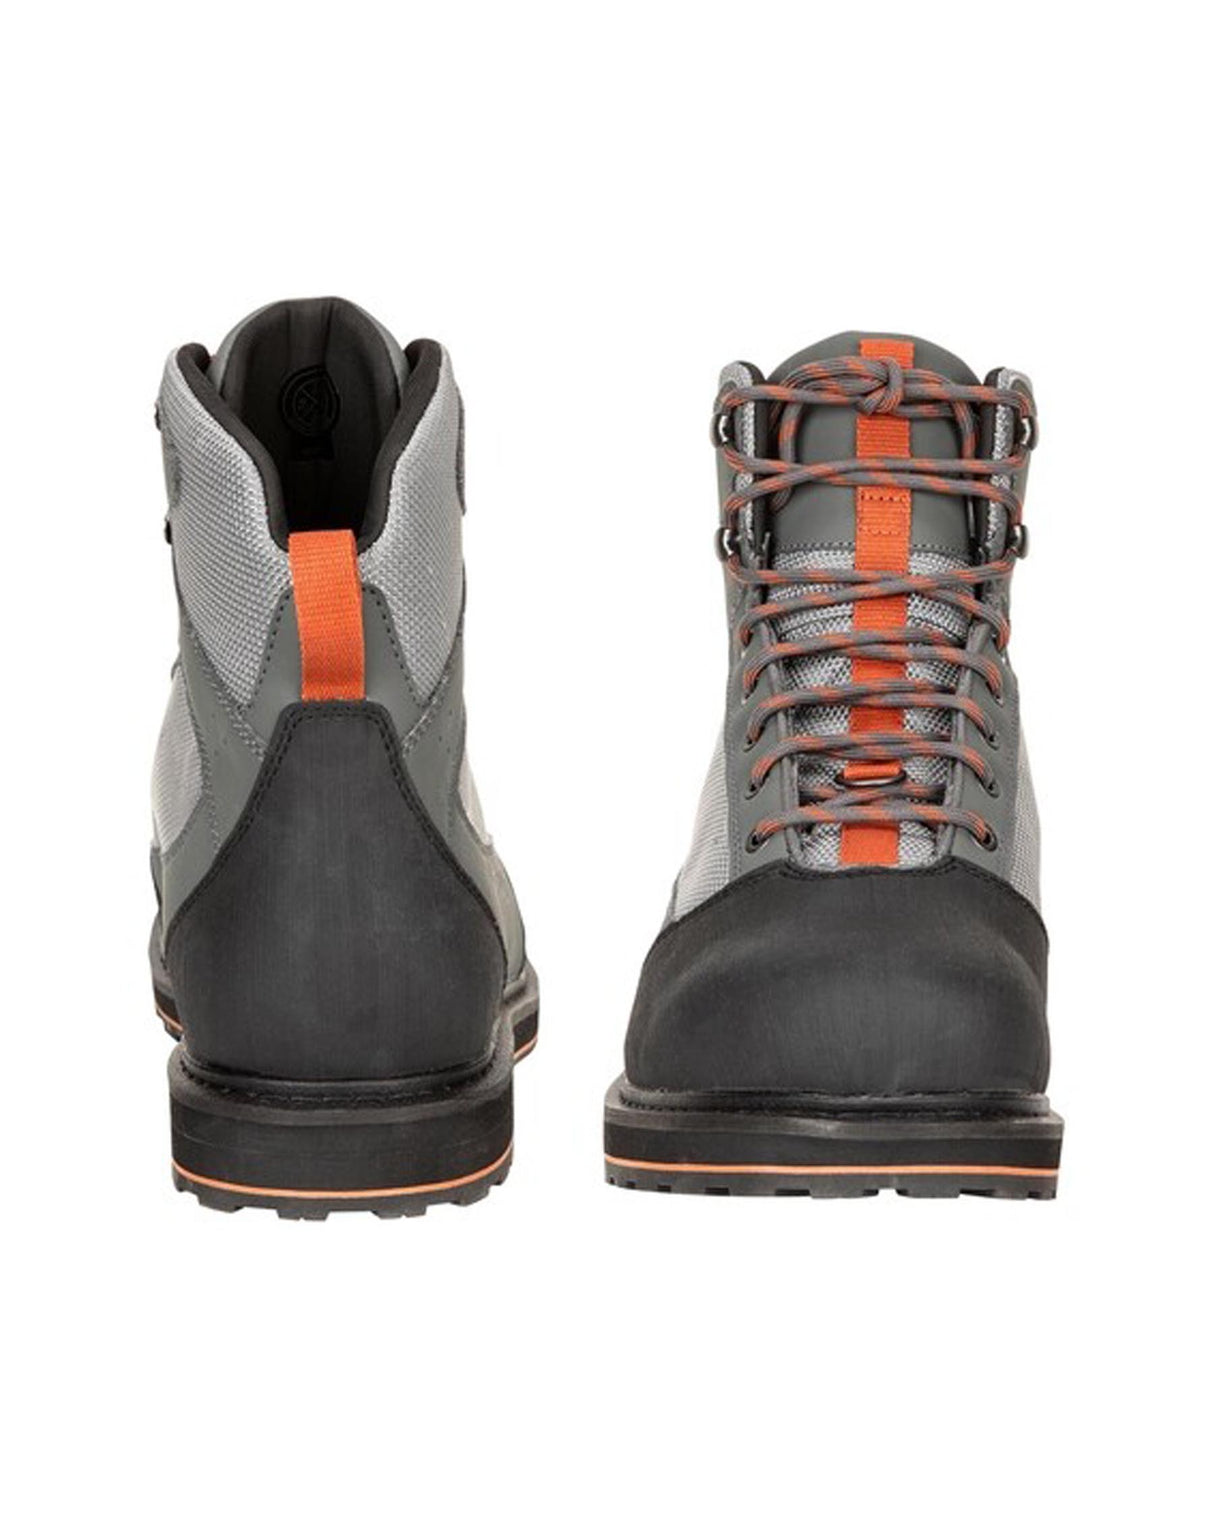 SIMMS MENS TRIBUTARY BOOT